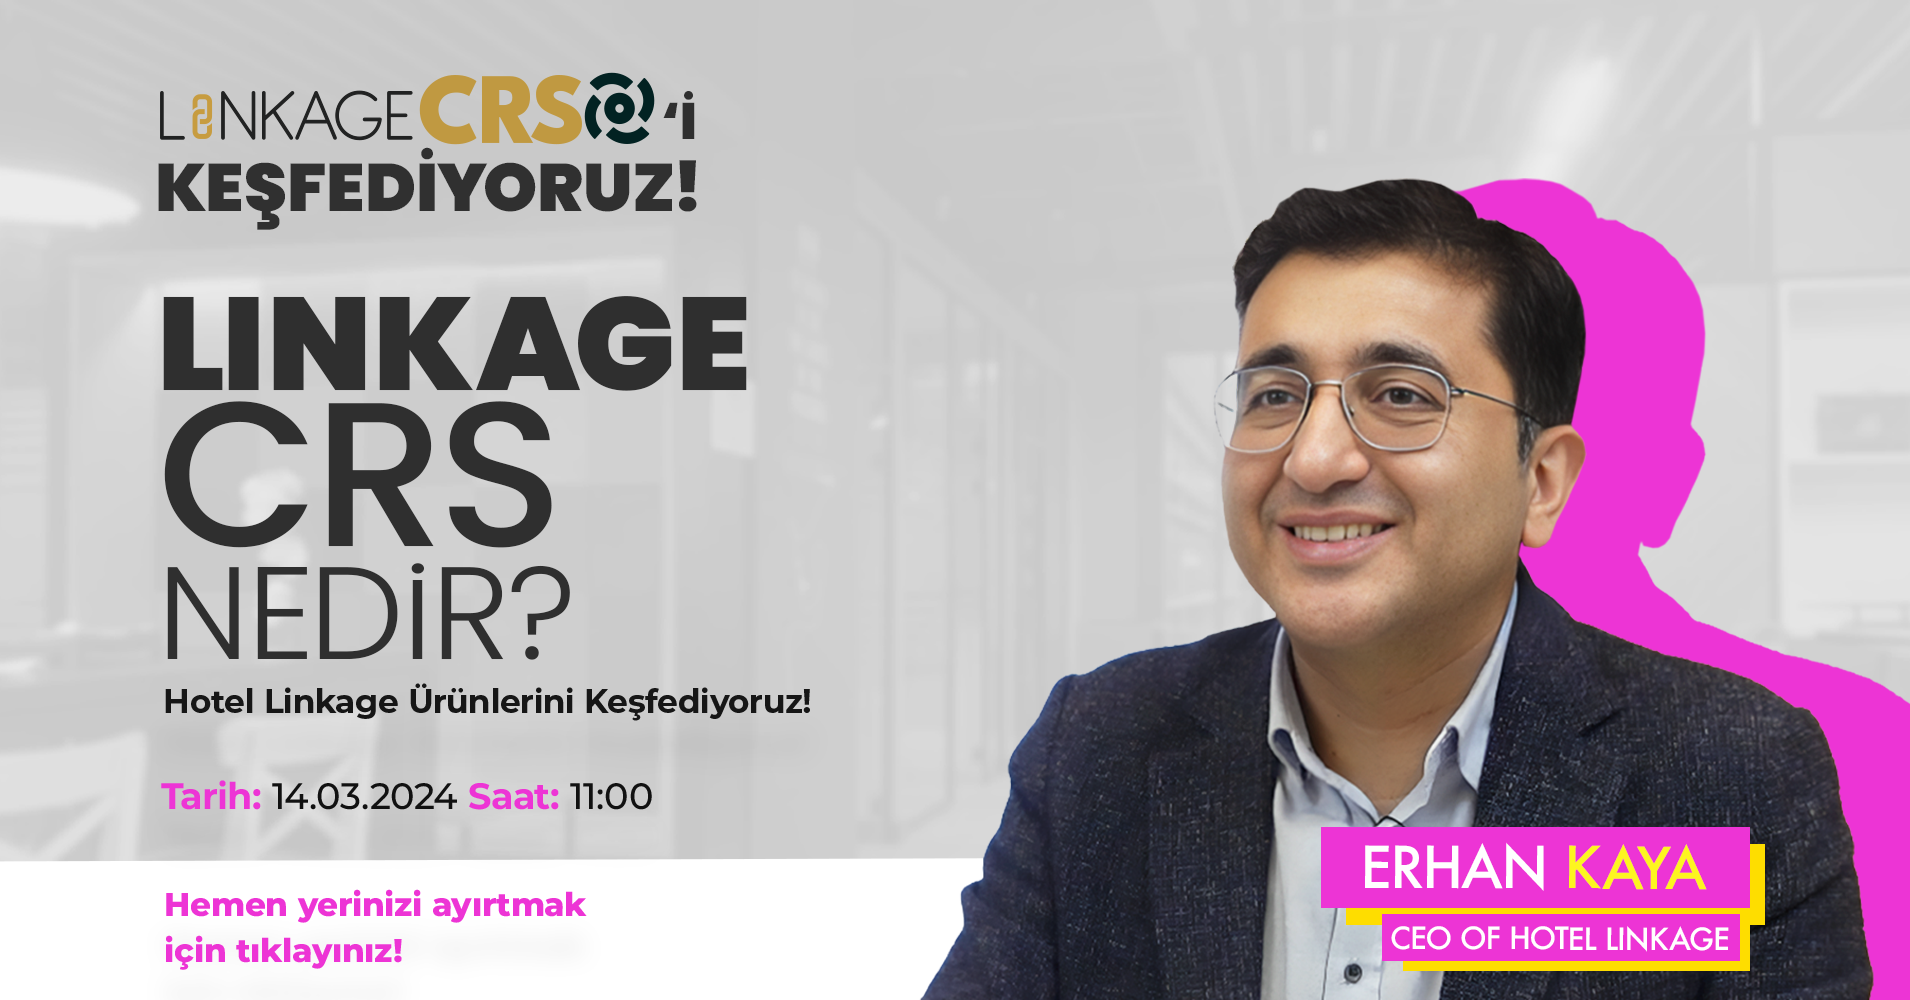 Erhan Kaya, CEO of Hotel Linkage, smiling in a promotional image for the upcoming webinar titled 'Discover Linkage CRS' on March 14, 2024, focused on direct booking strategies for hotels to improve profitability and operations, with details on registration and QR code.